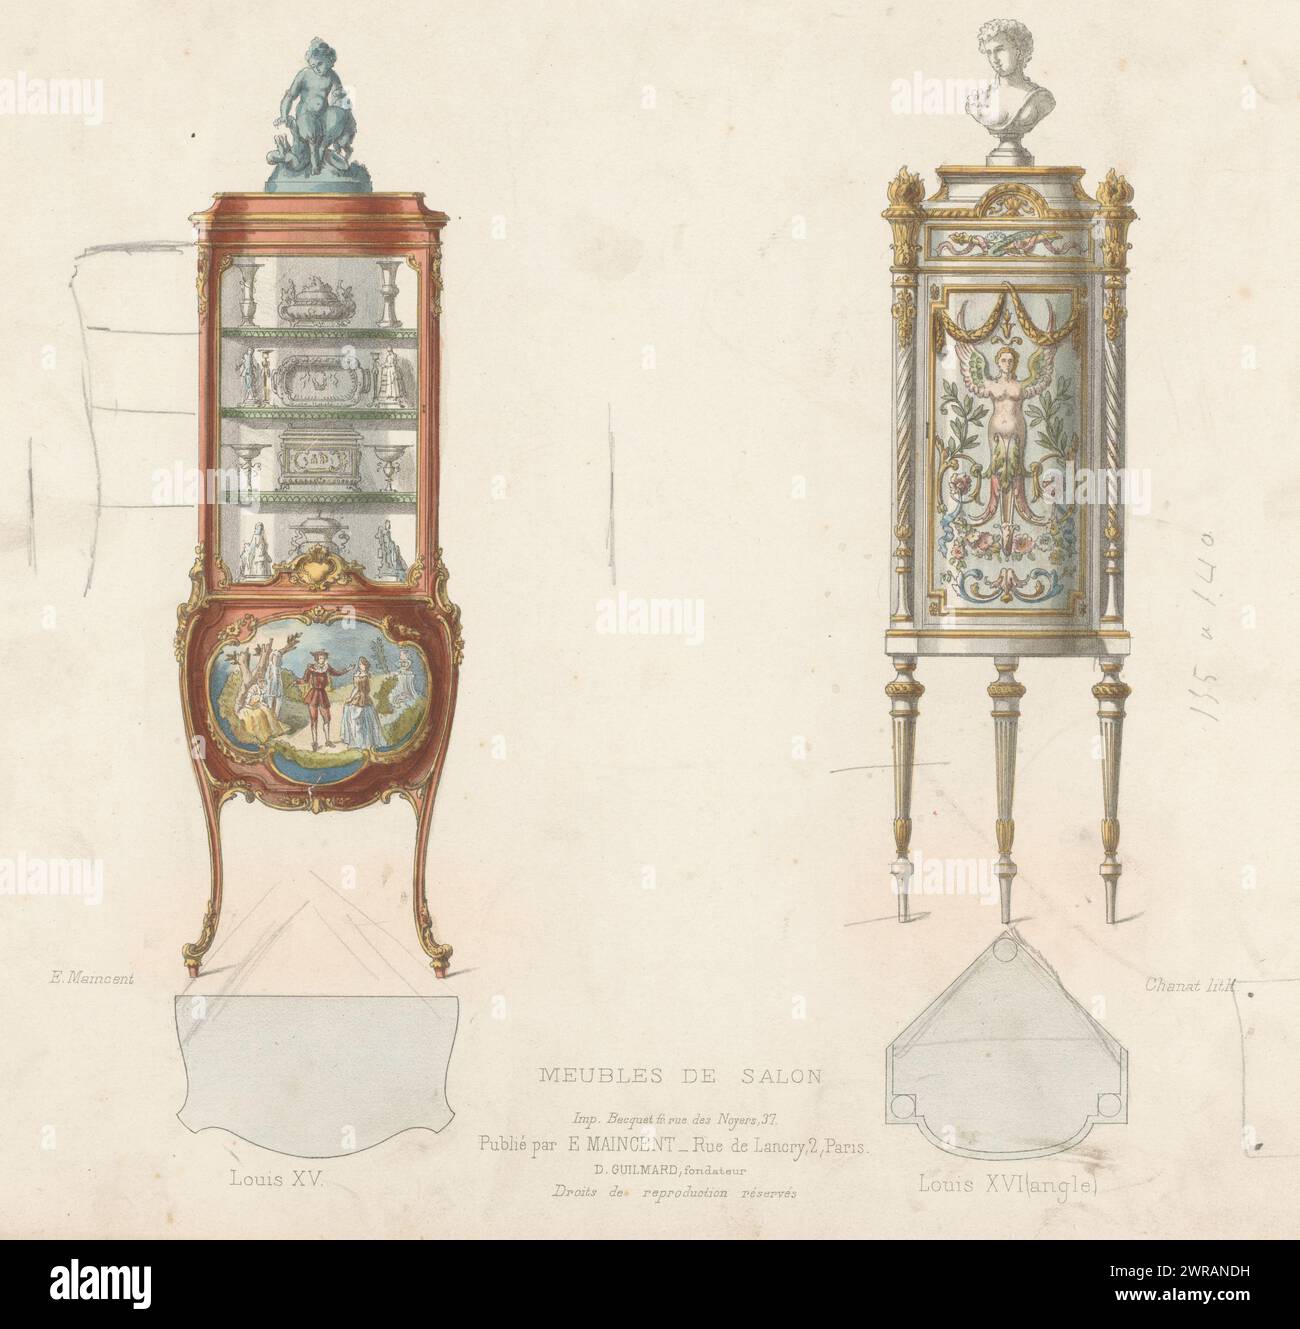 Two cabinets with statues, Meubles de salon / Louis XV / Louis XVI (angle) (title on object), Le garde-meuble / Collection de Meubles (series title on object), Two narrow cabinets in the styles of Louis, on top of which are a statue and bust. Print from 295th Livraison., print maker: Chanat, printer: Becquet frères, publisher: Eugène Maincent, Paris, 1885 - 1895, paper, height 276 mm × width 359 mm, print Stock Photo